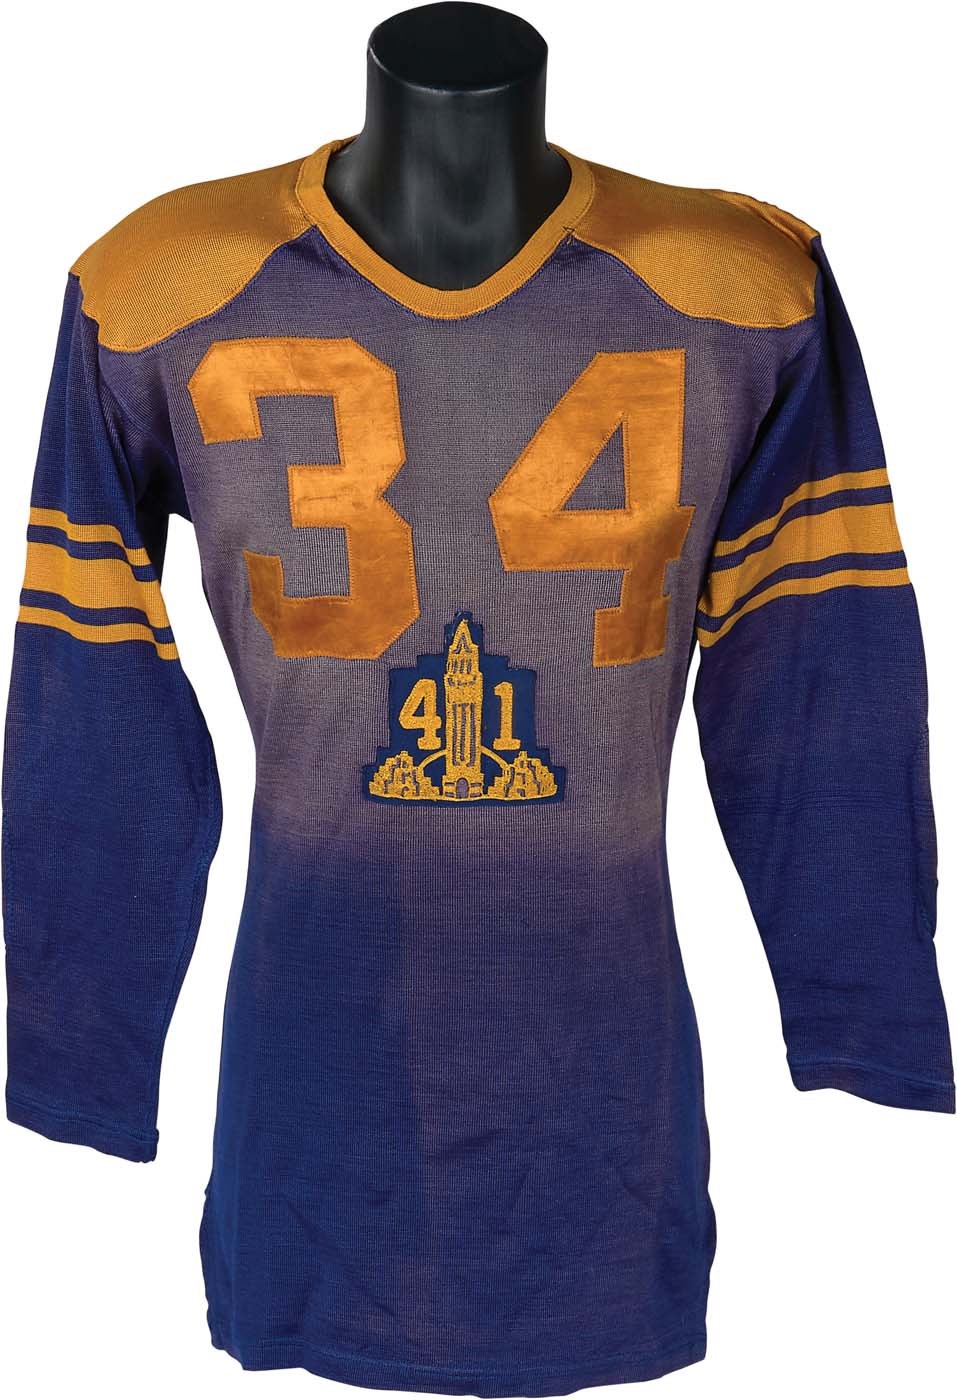 1941 College Football Mystery Jersey